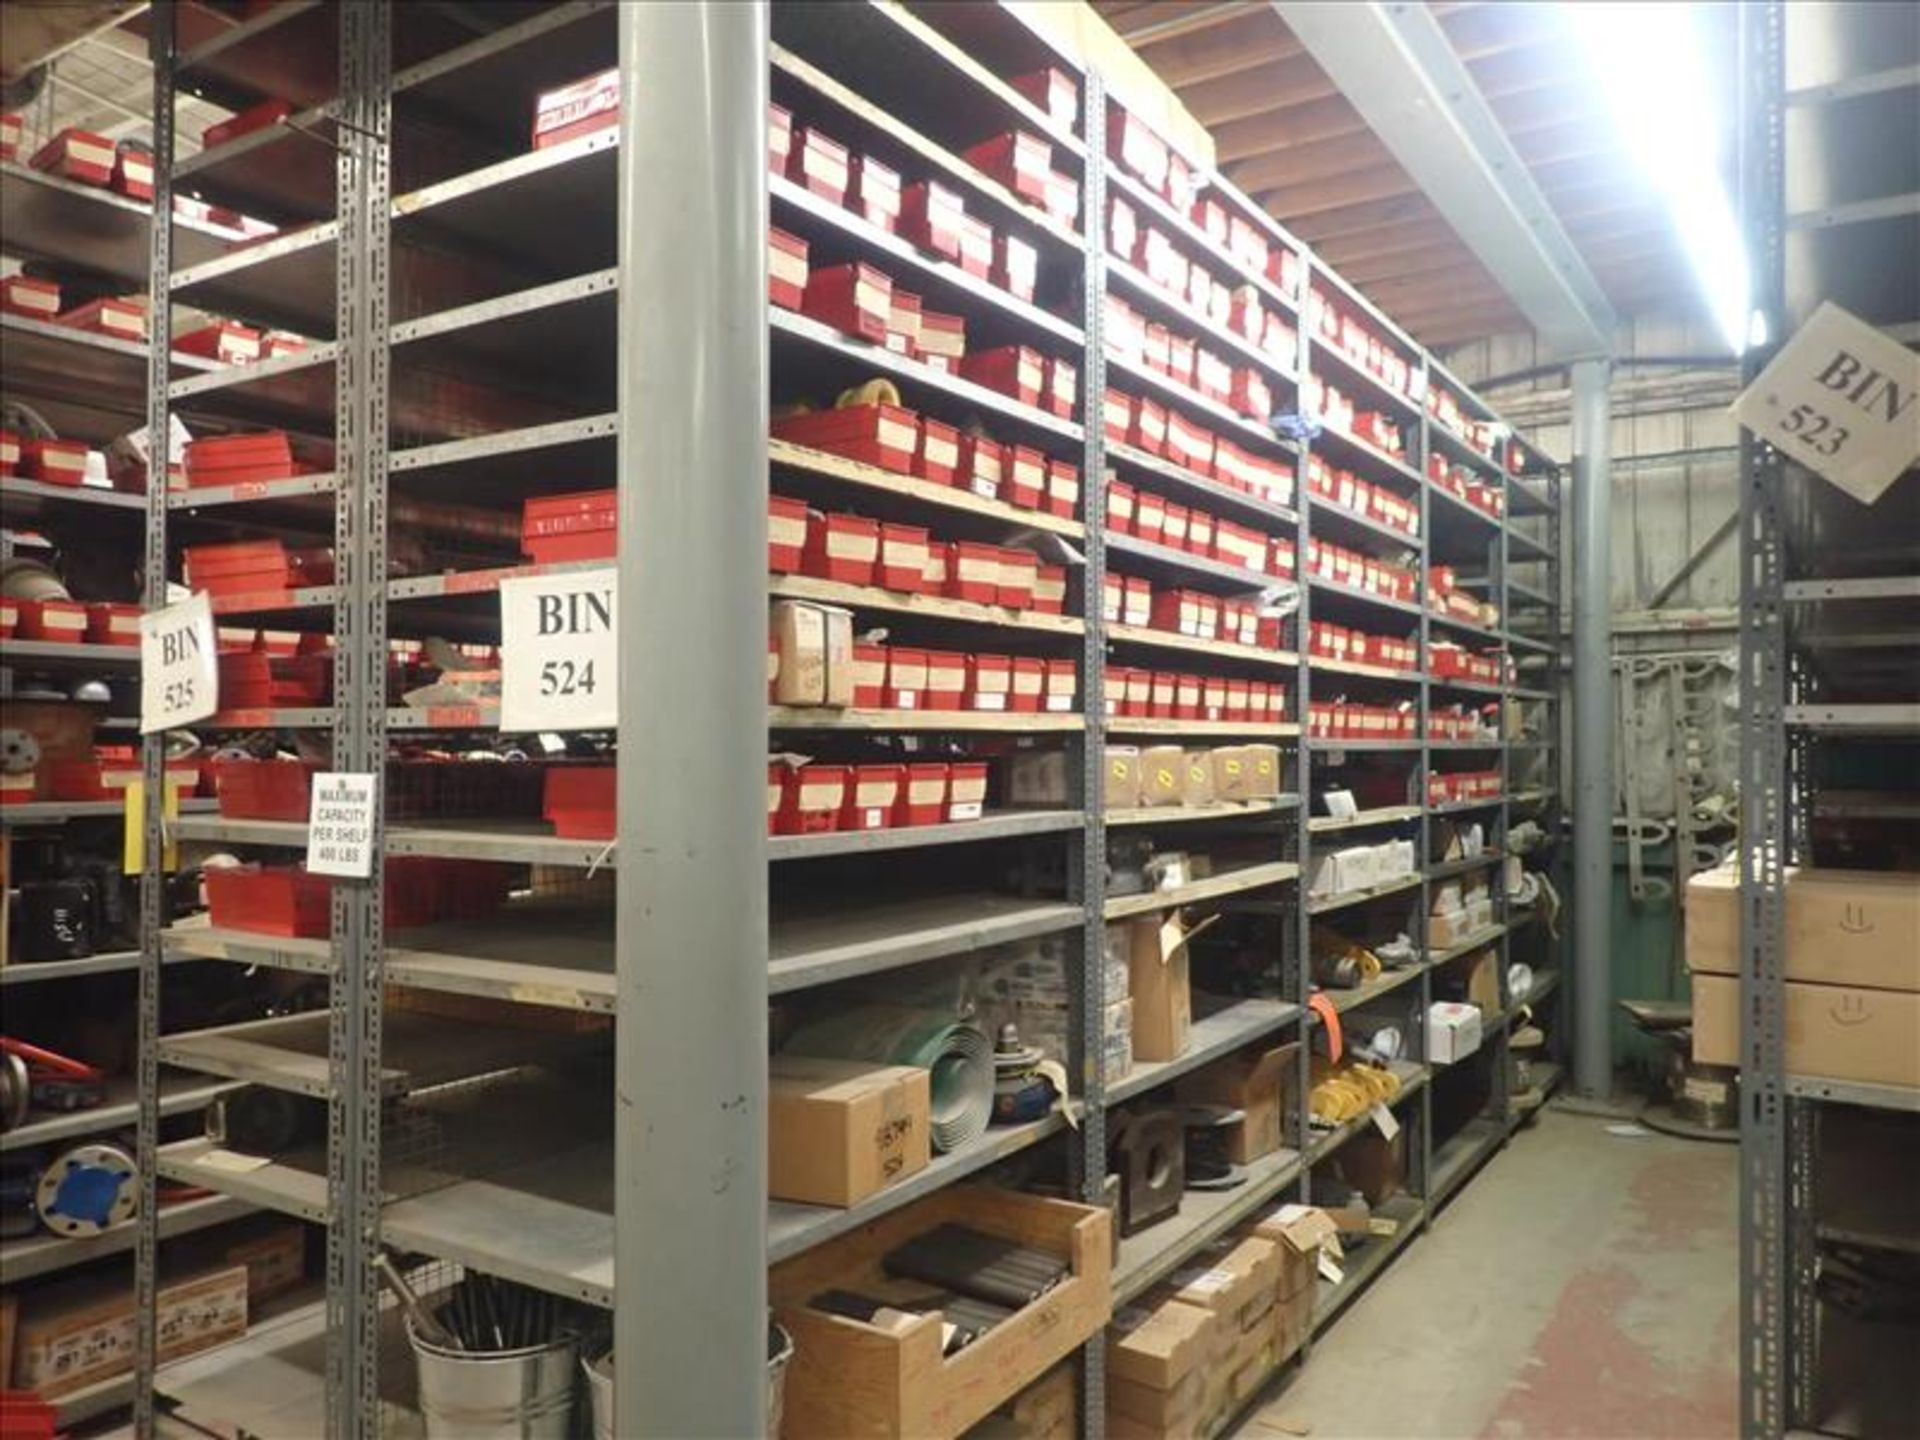 contents of shelving: treaded rods, brackets, spare parts, etc. (Bin 524) (Tag 8019 Loc WH South)